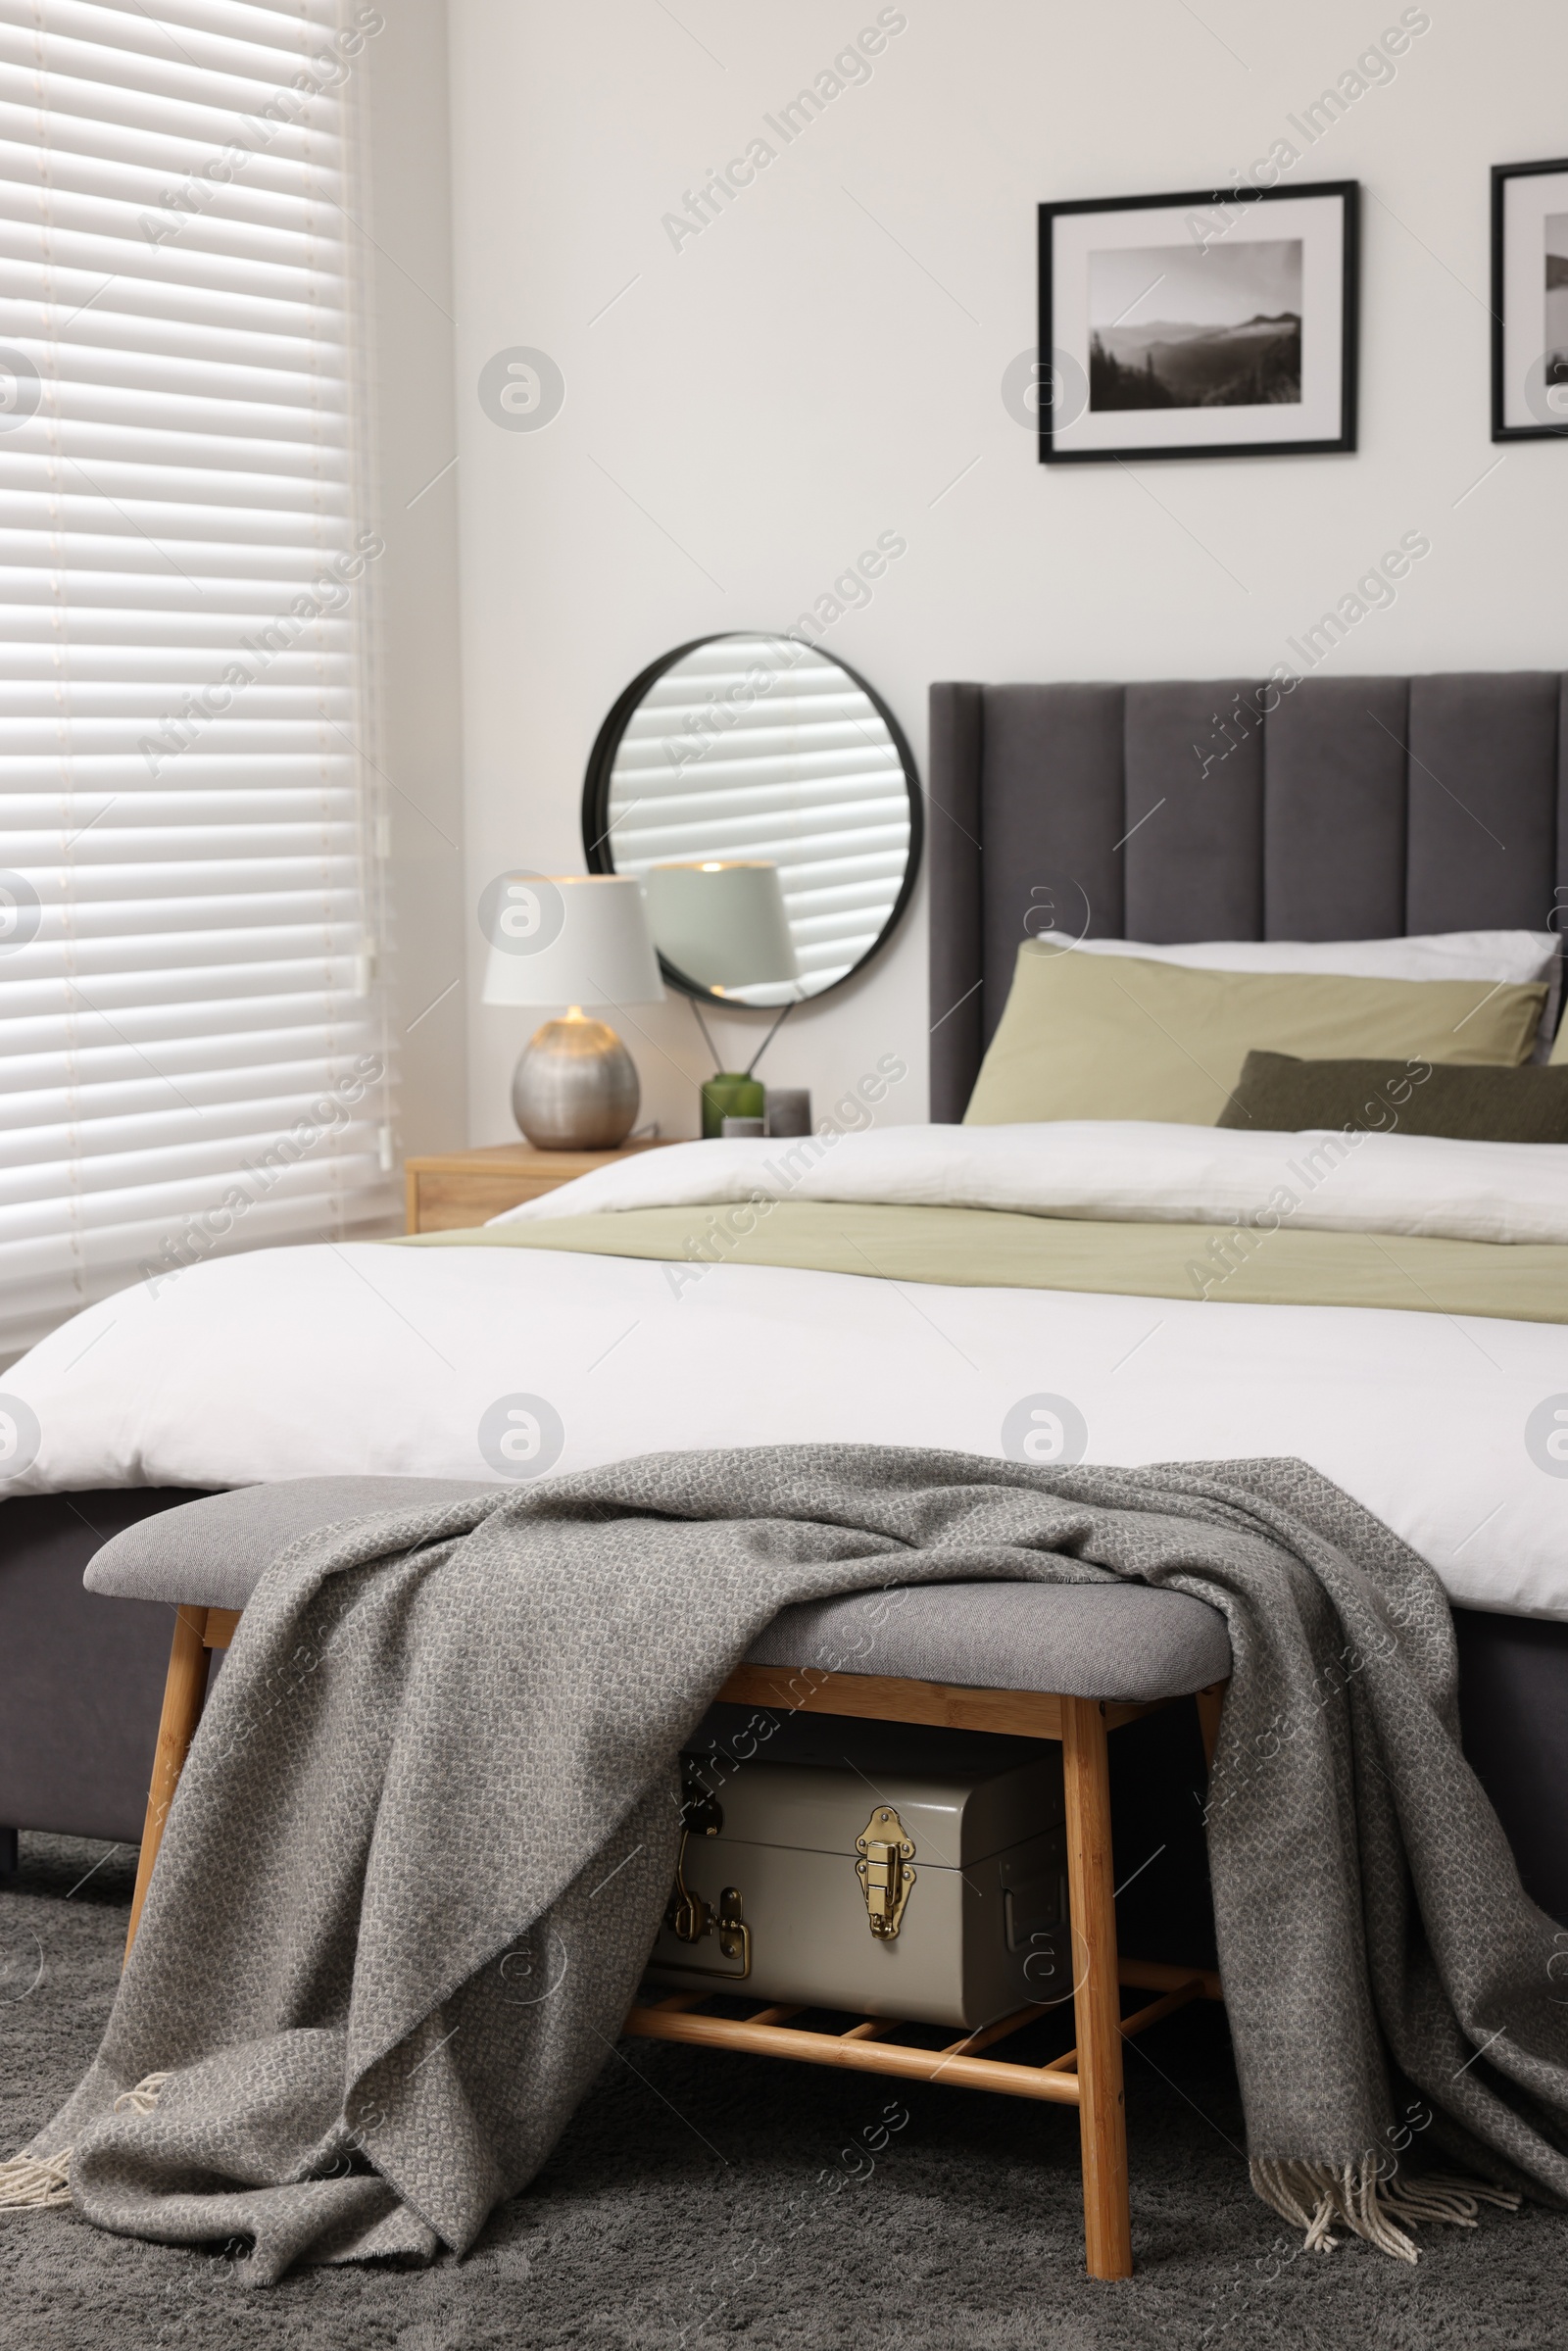 Photo of Horizontal blinds on window, comfortable bed and ottoman with blanket in room